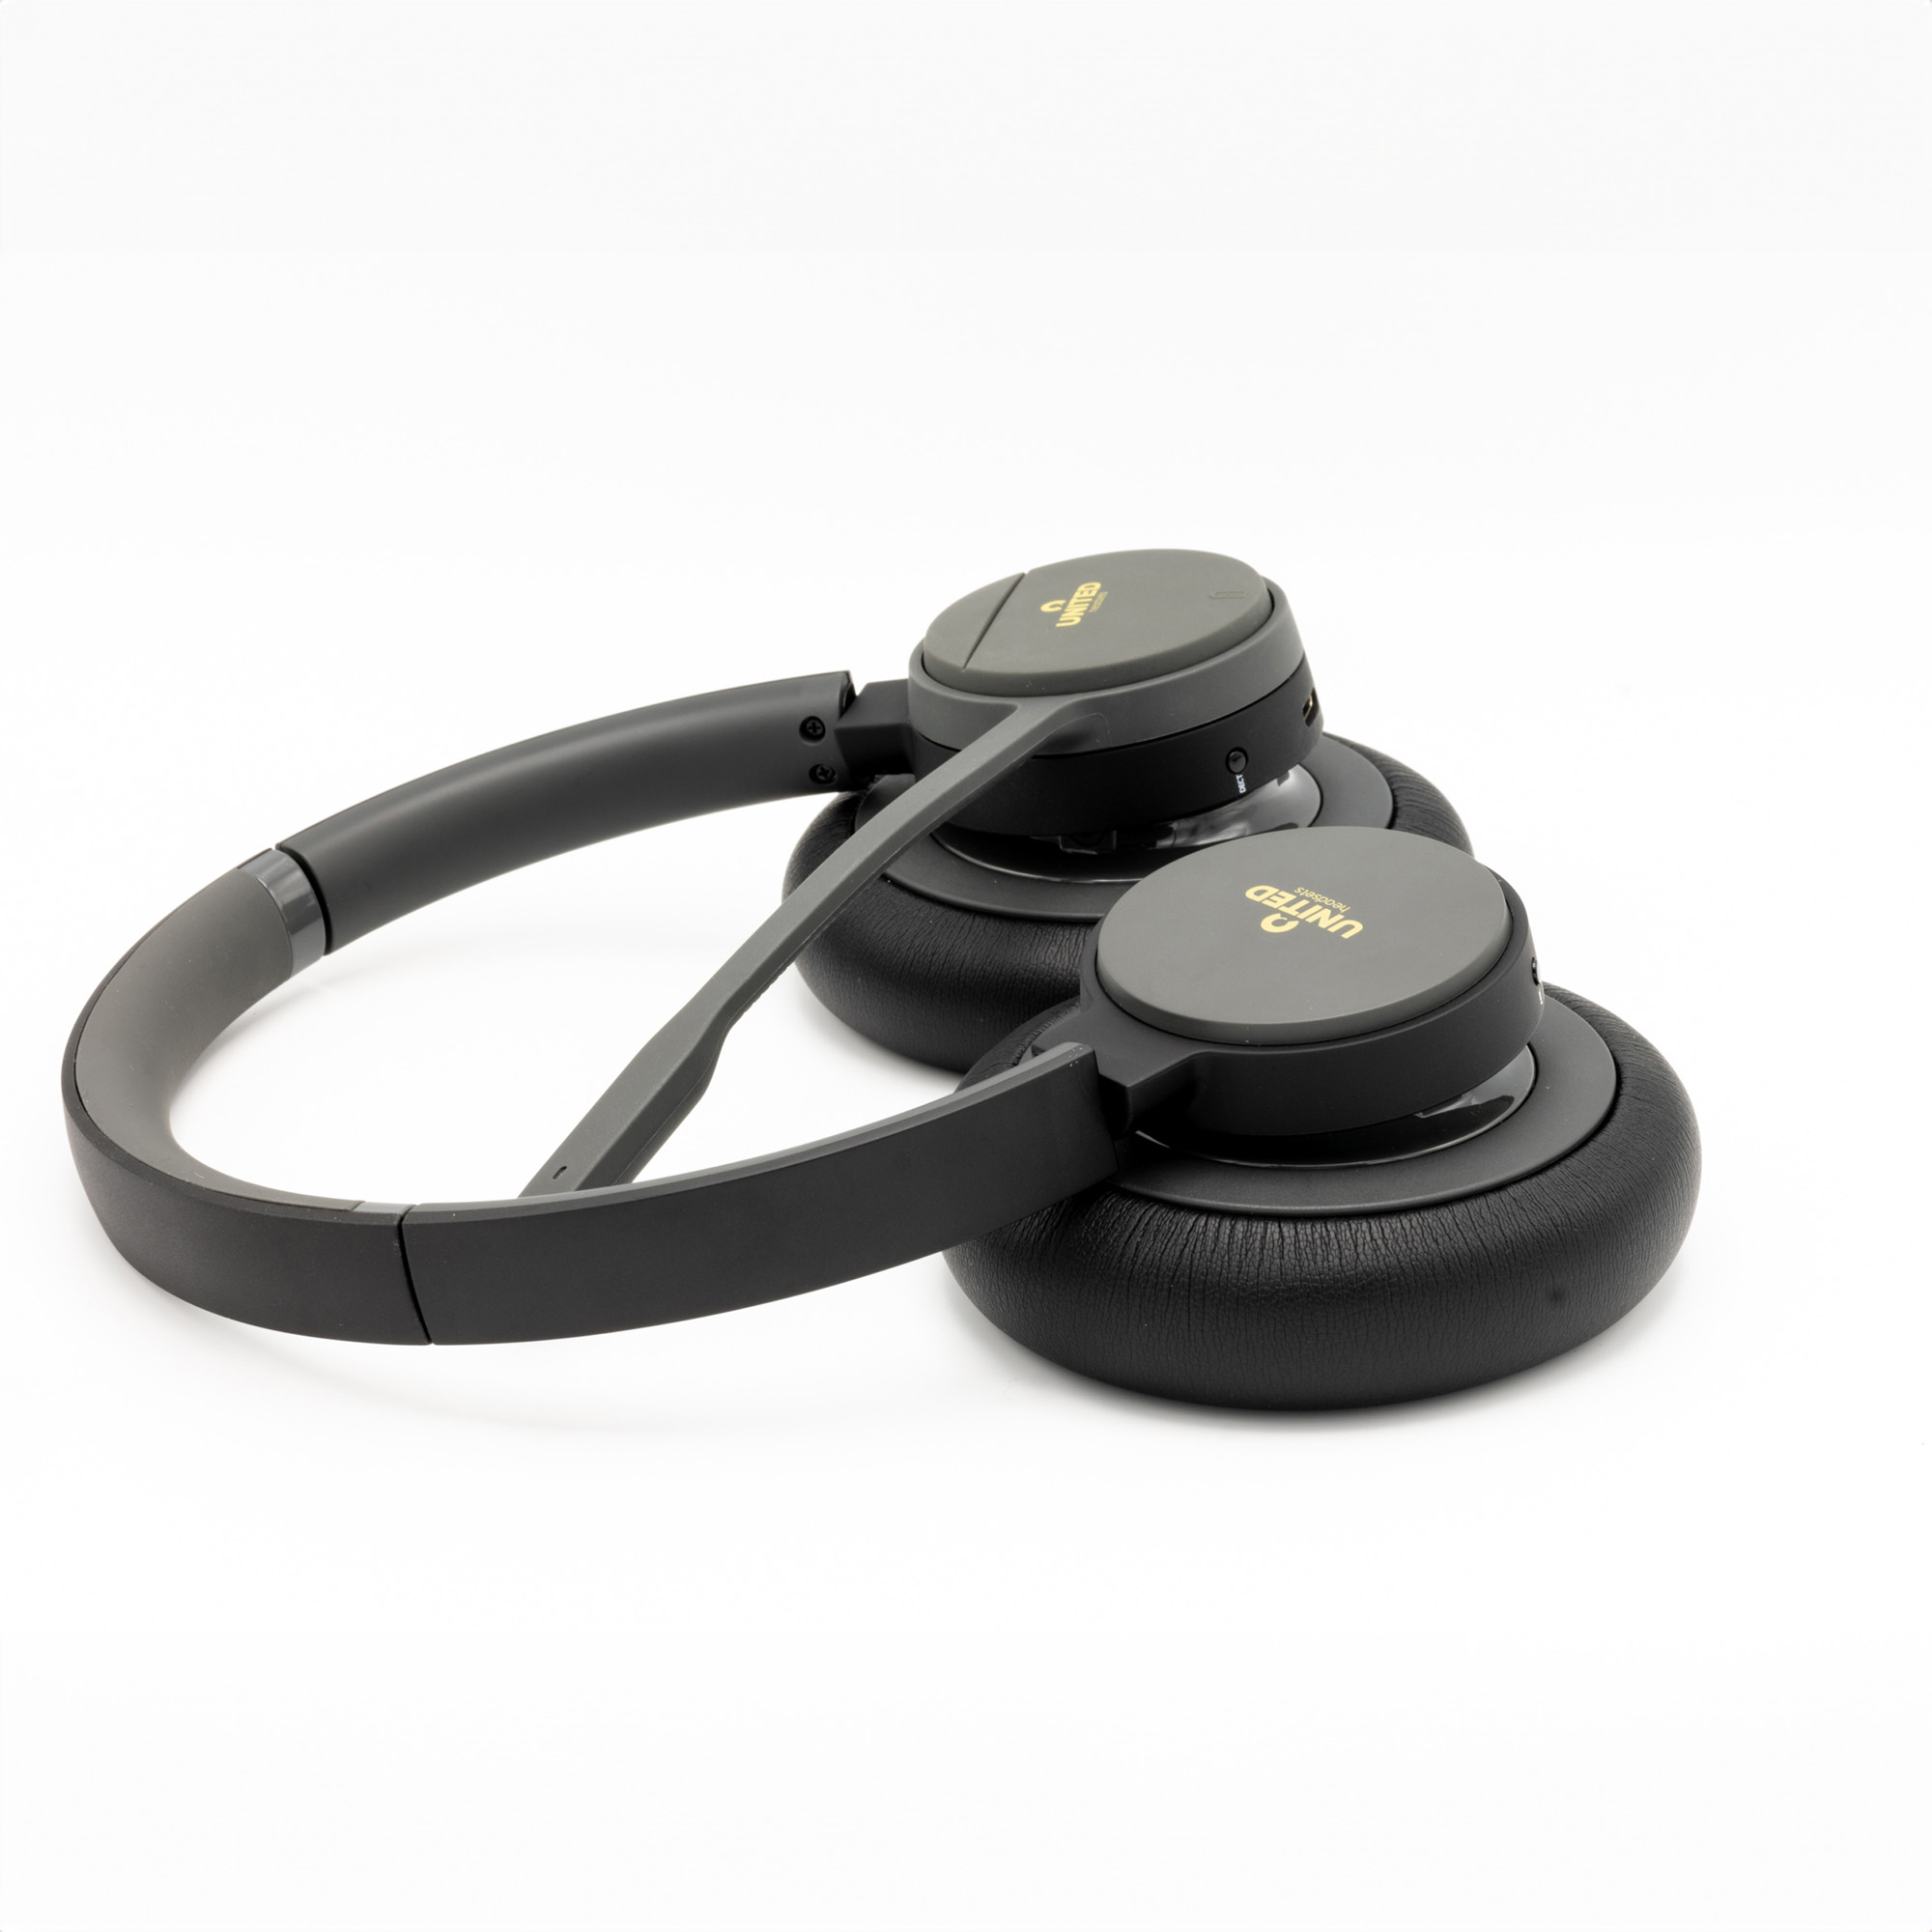 United Headsets Clave Duo ANC wireless headset